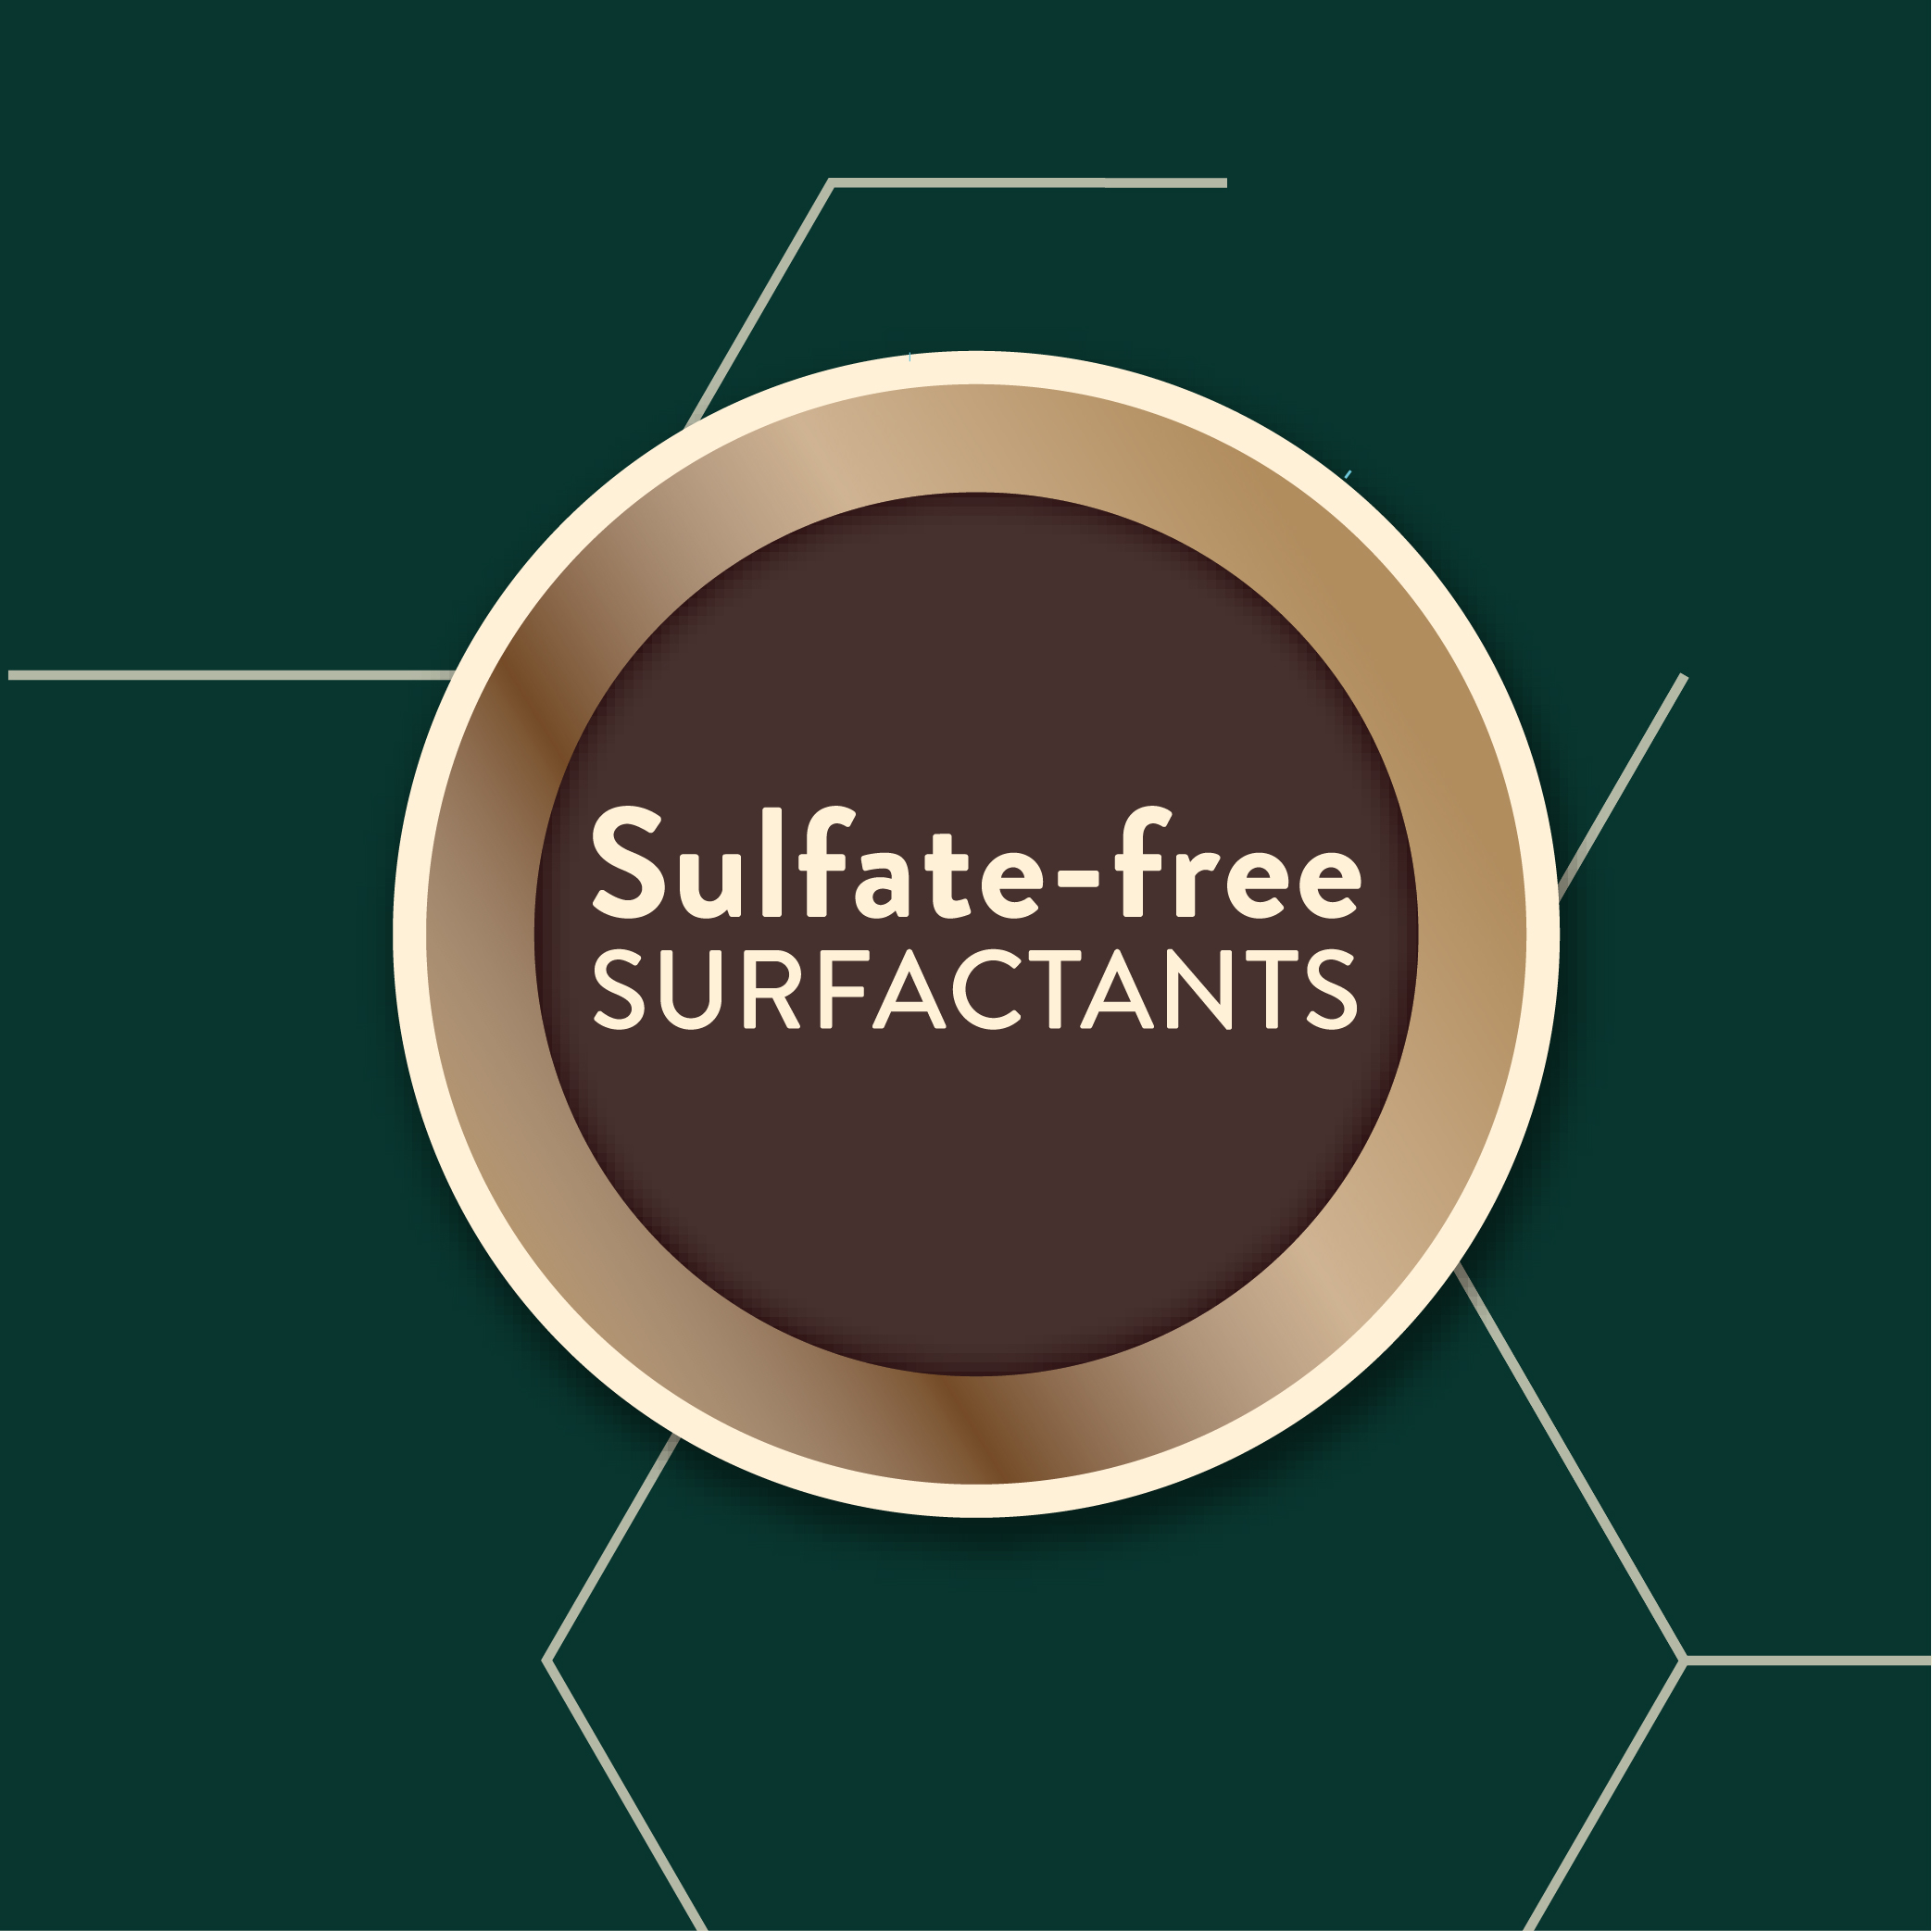 Sulfate-free surfactants